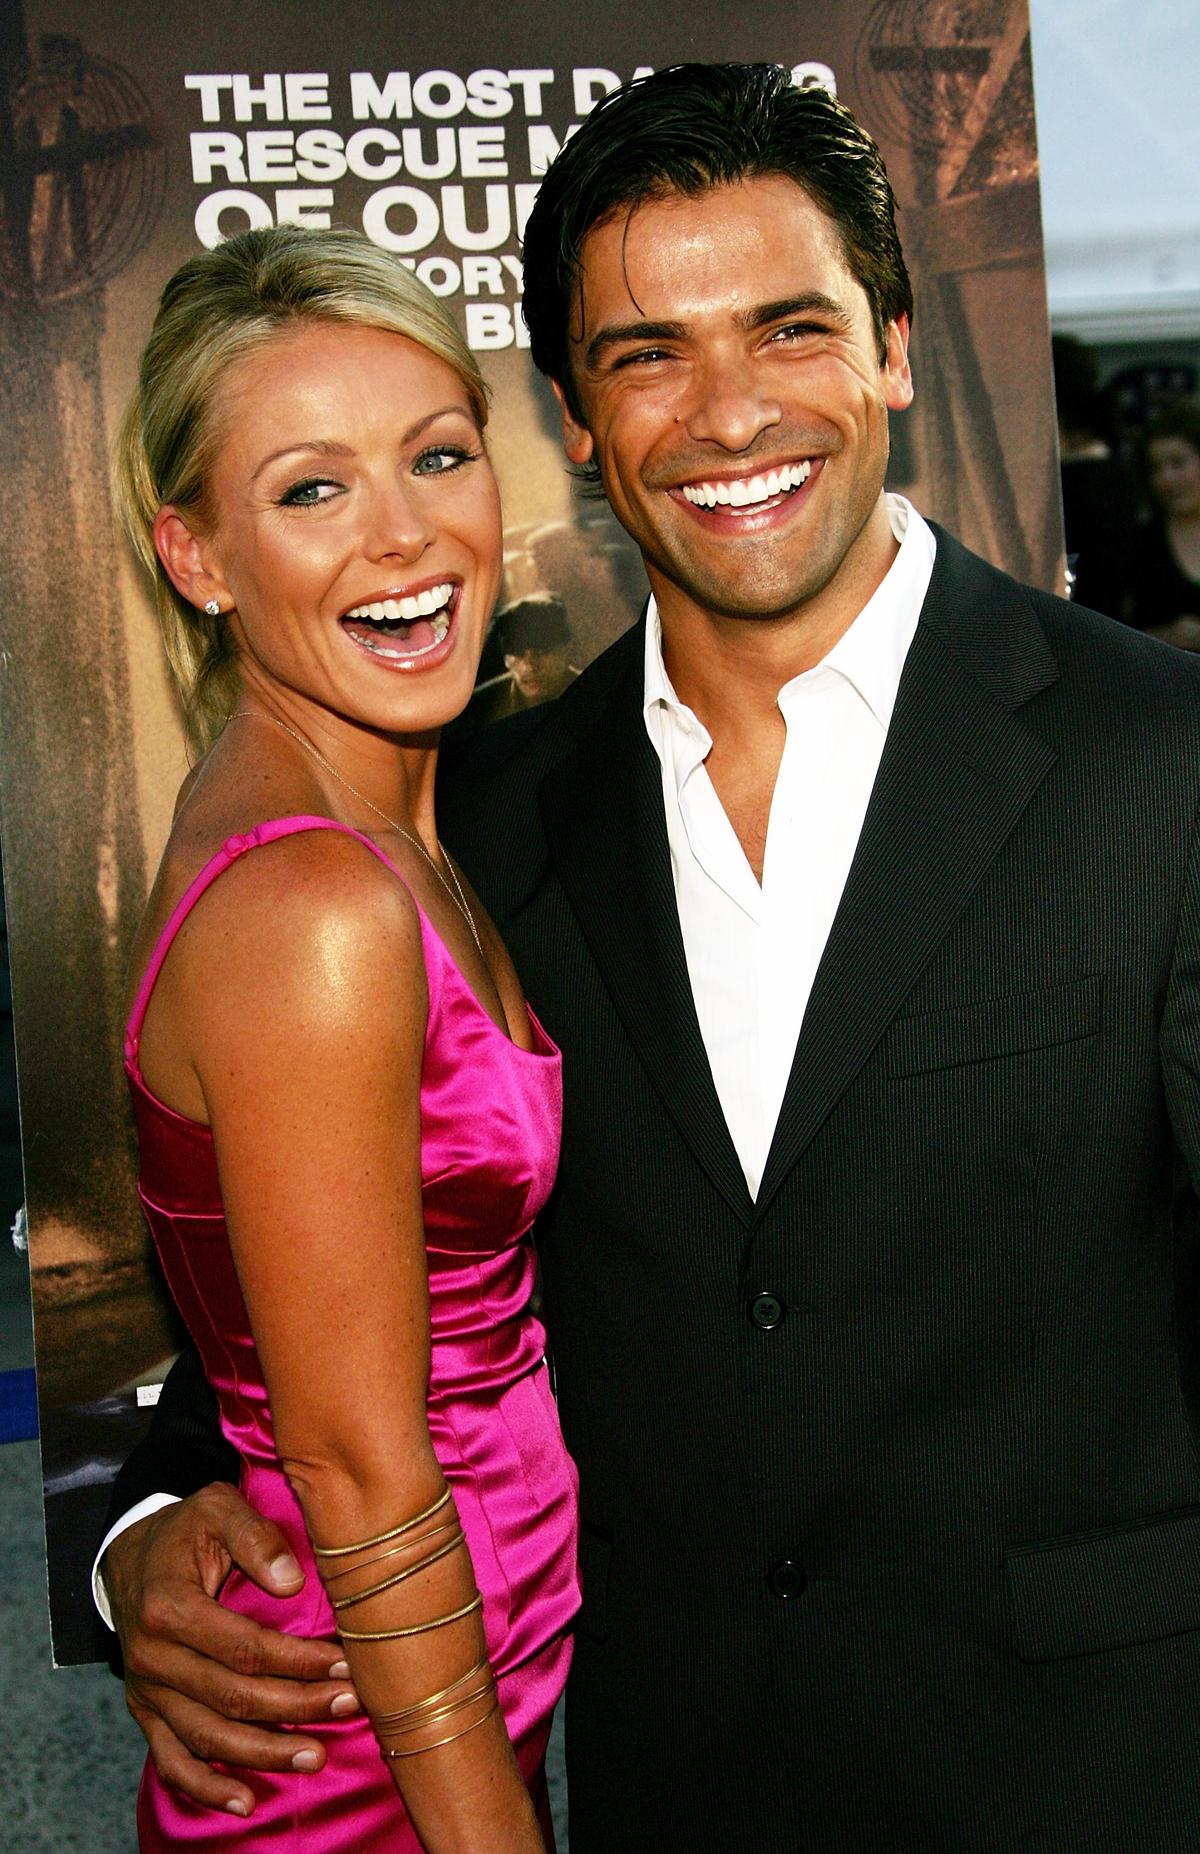 Ripa and Consuelos at a screening of Miramax's "The Great Raid" at The Intrepid Sea, Air & Space Museum in New York City in 2005 (©Getty Images | <a href="https://www.gettyimages.com.au/detail/news-photo/actor-mark-consuelos-and-wife-actress-kelly-ripa-attend-a-news-photo/53351306">Evan Agostini</a>)